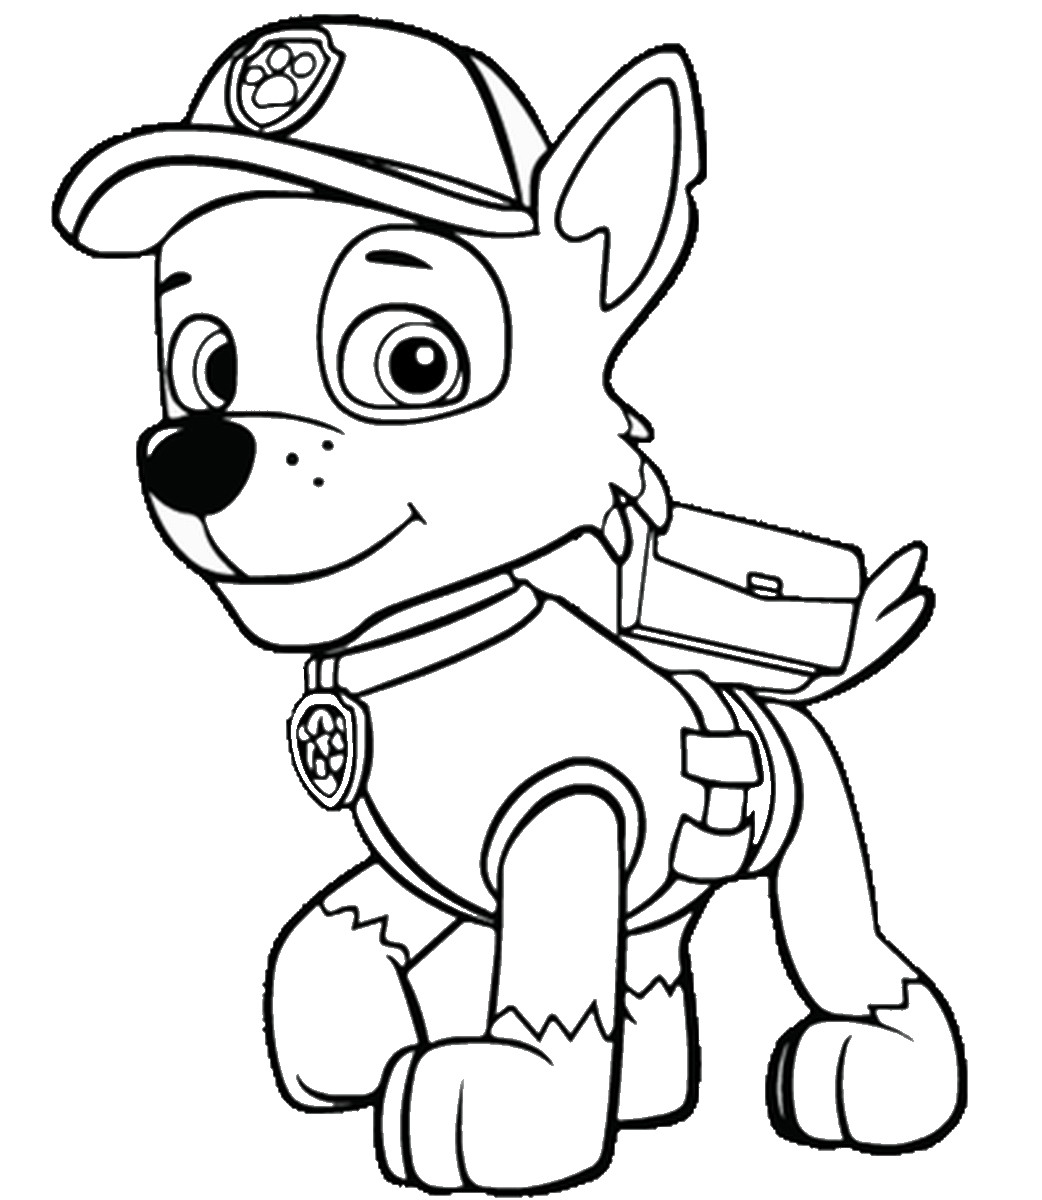 Free Paw Patrol Coloring Pages
 Top 10 PAW Patrol Coloring Pages 2017